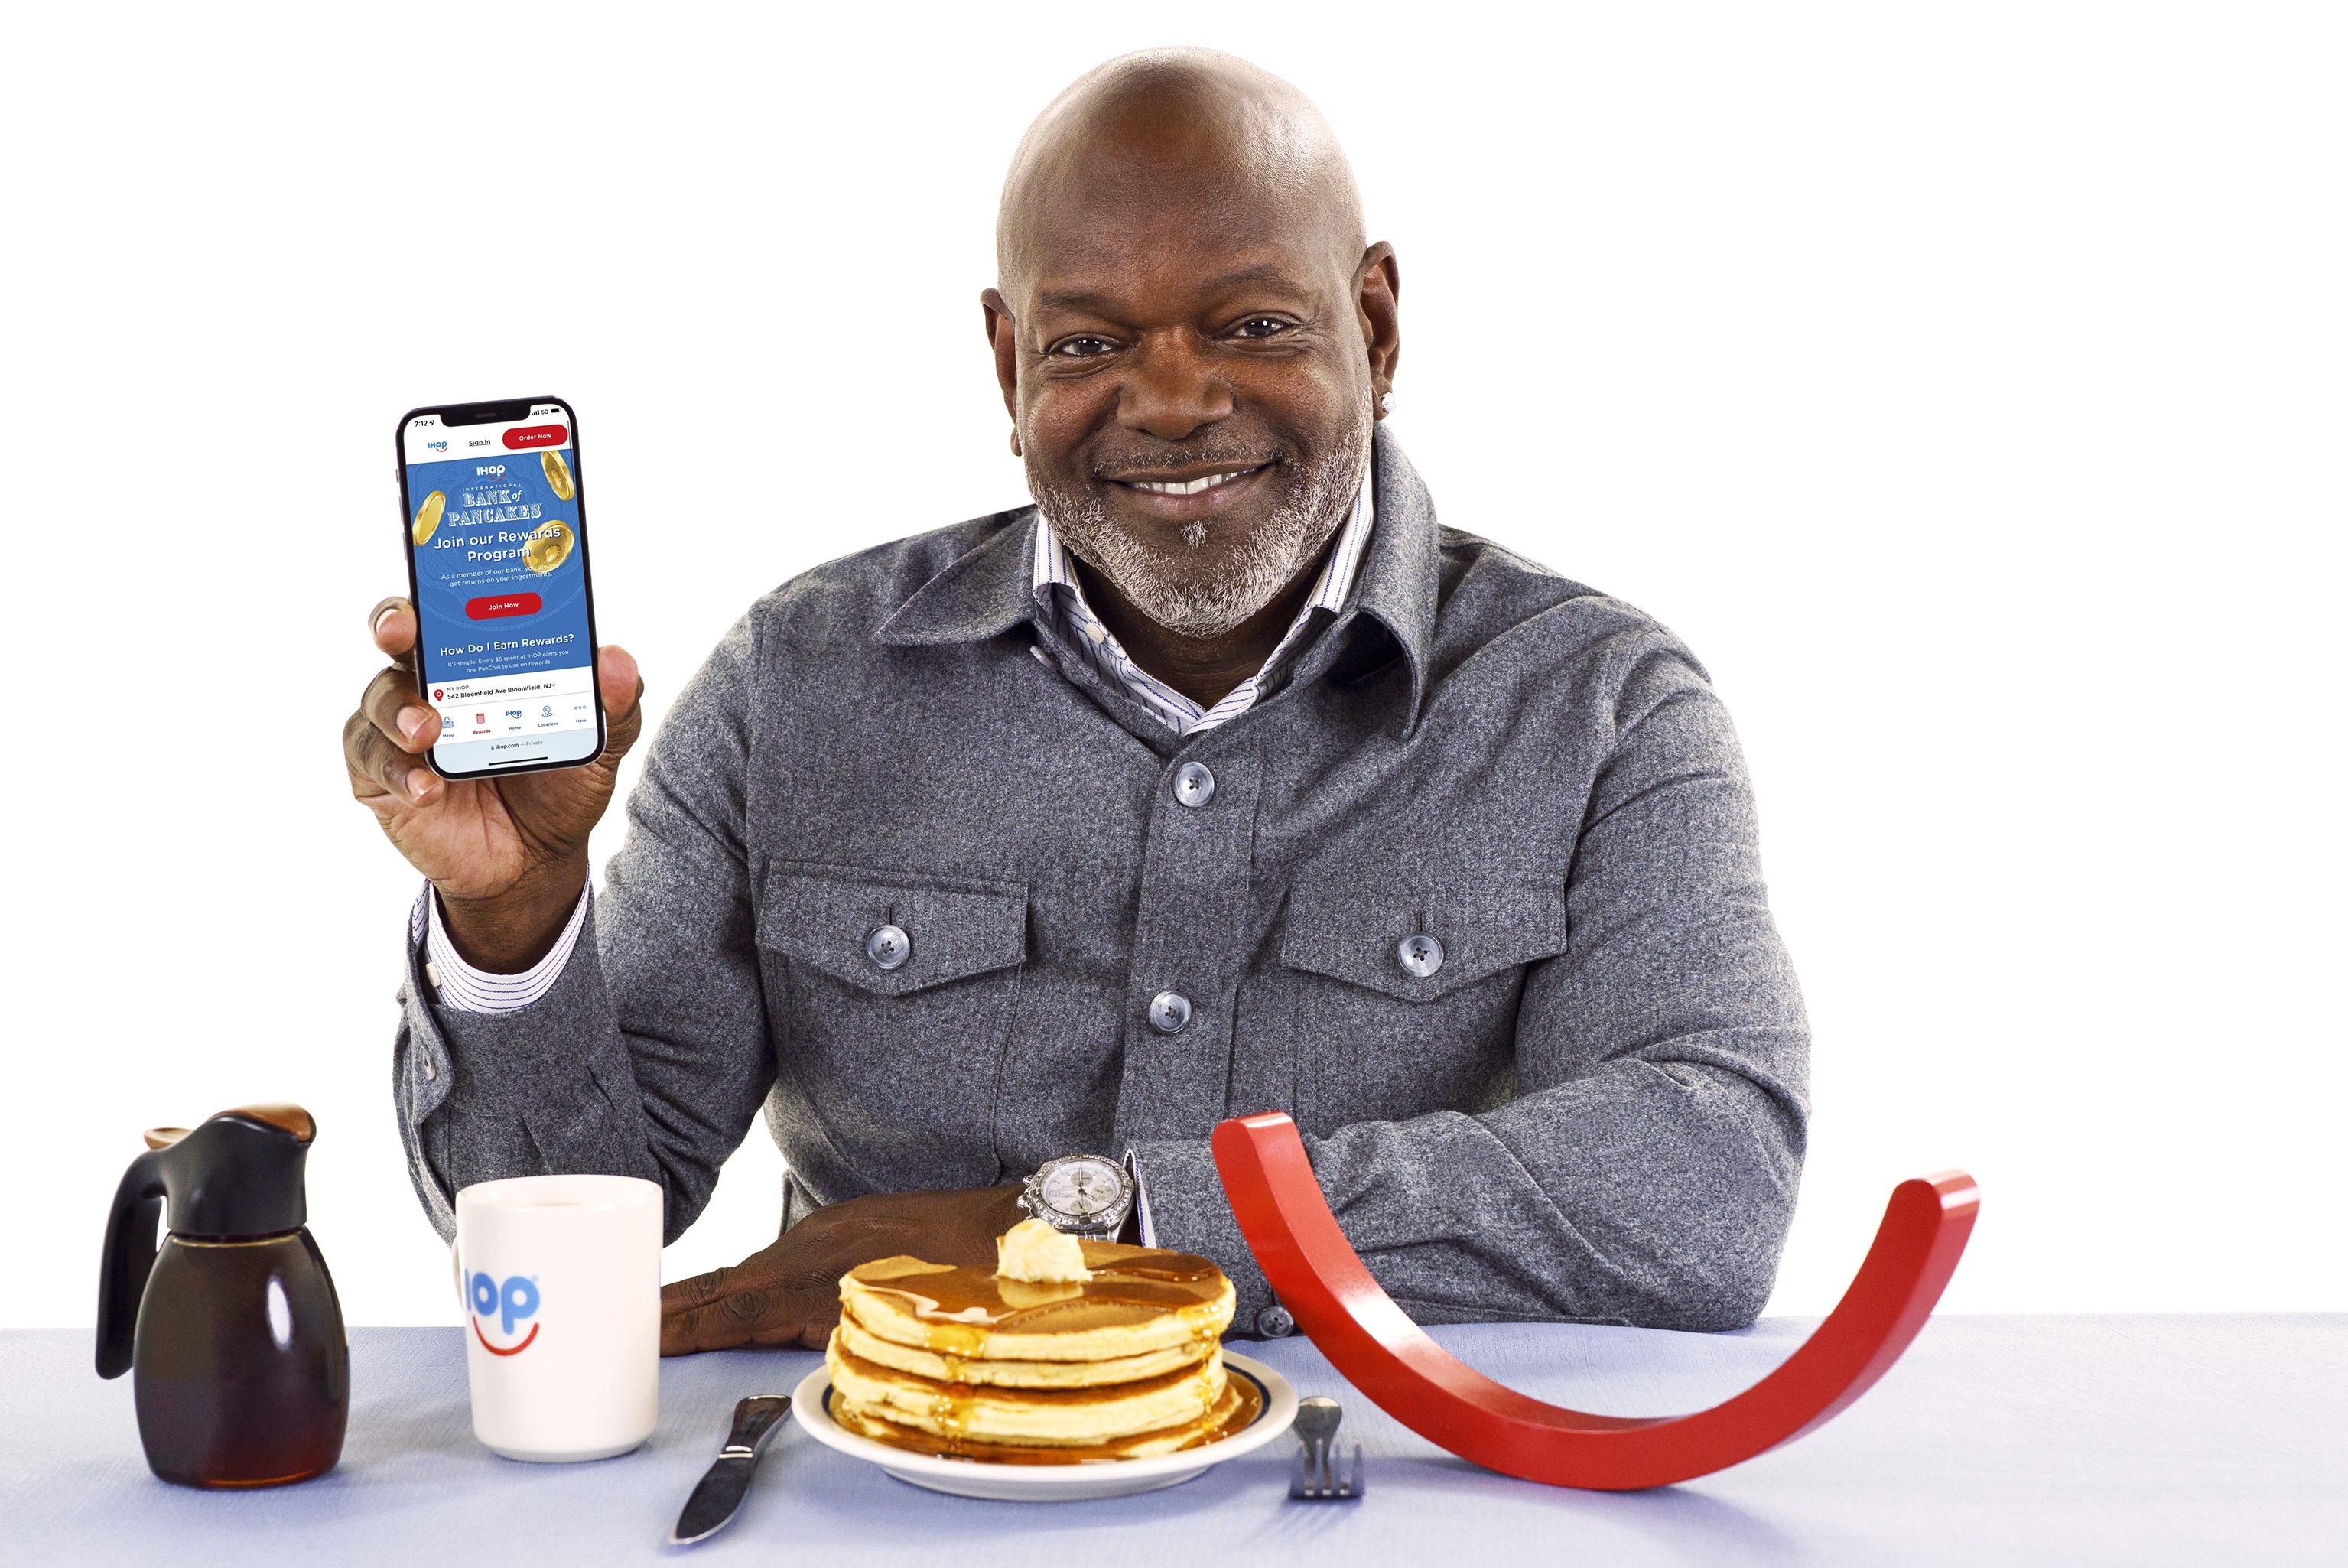 Smith's go-to order at IHOP is a double stack of pancakes, eggs, sausage and hash browns